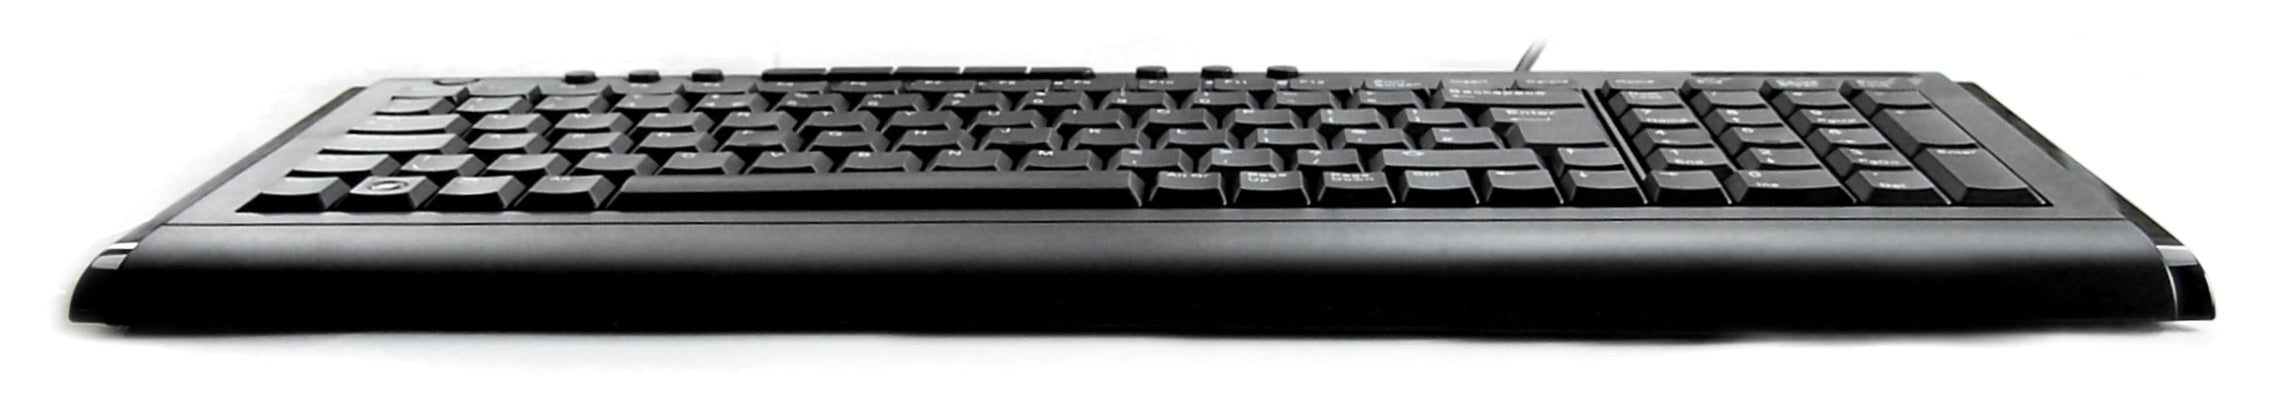 Accuratus 2200 - USB Compact Size Multimedia Keyboard with Gloss Black Styling